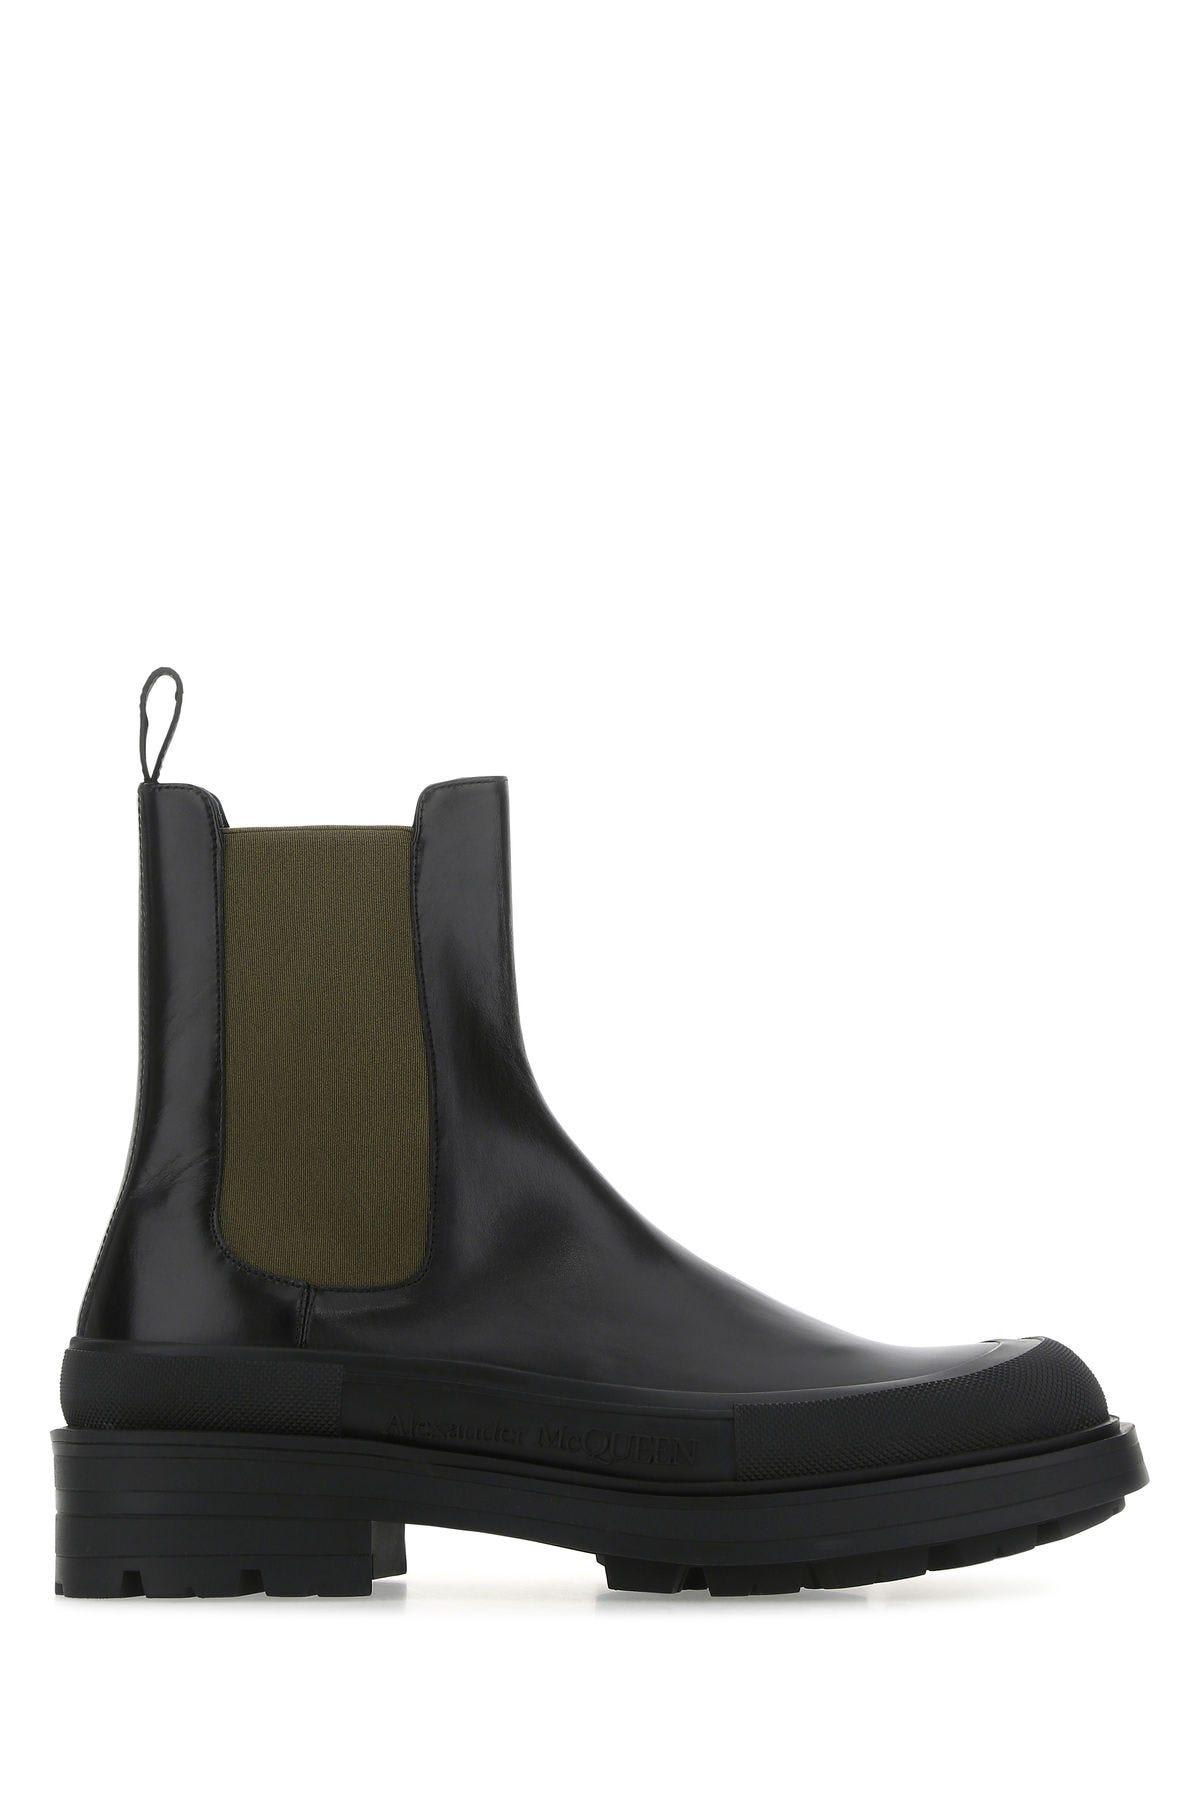 Shop Alexander Mcqueen Black Leather Boxcar Ankle Boots